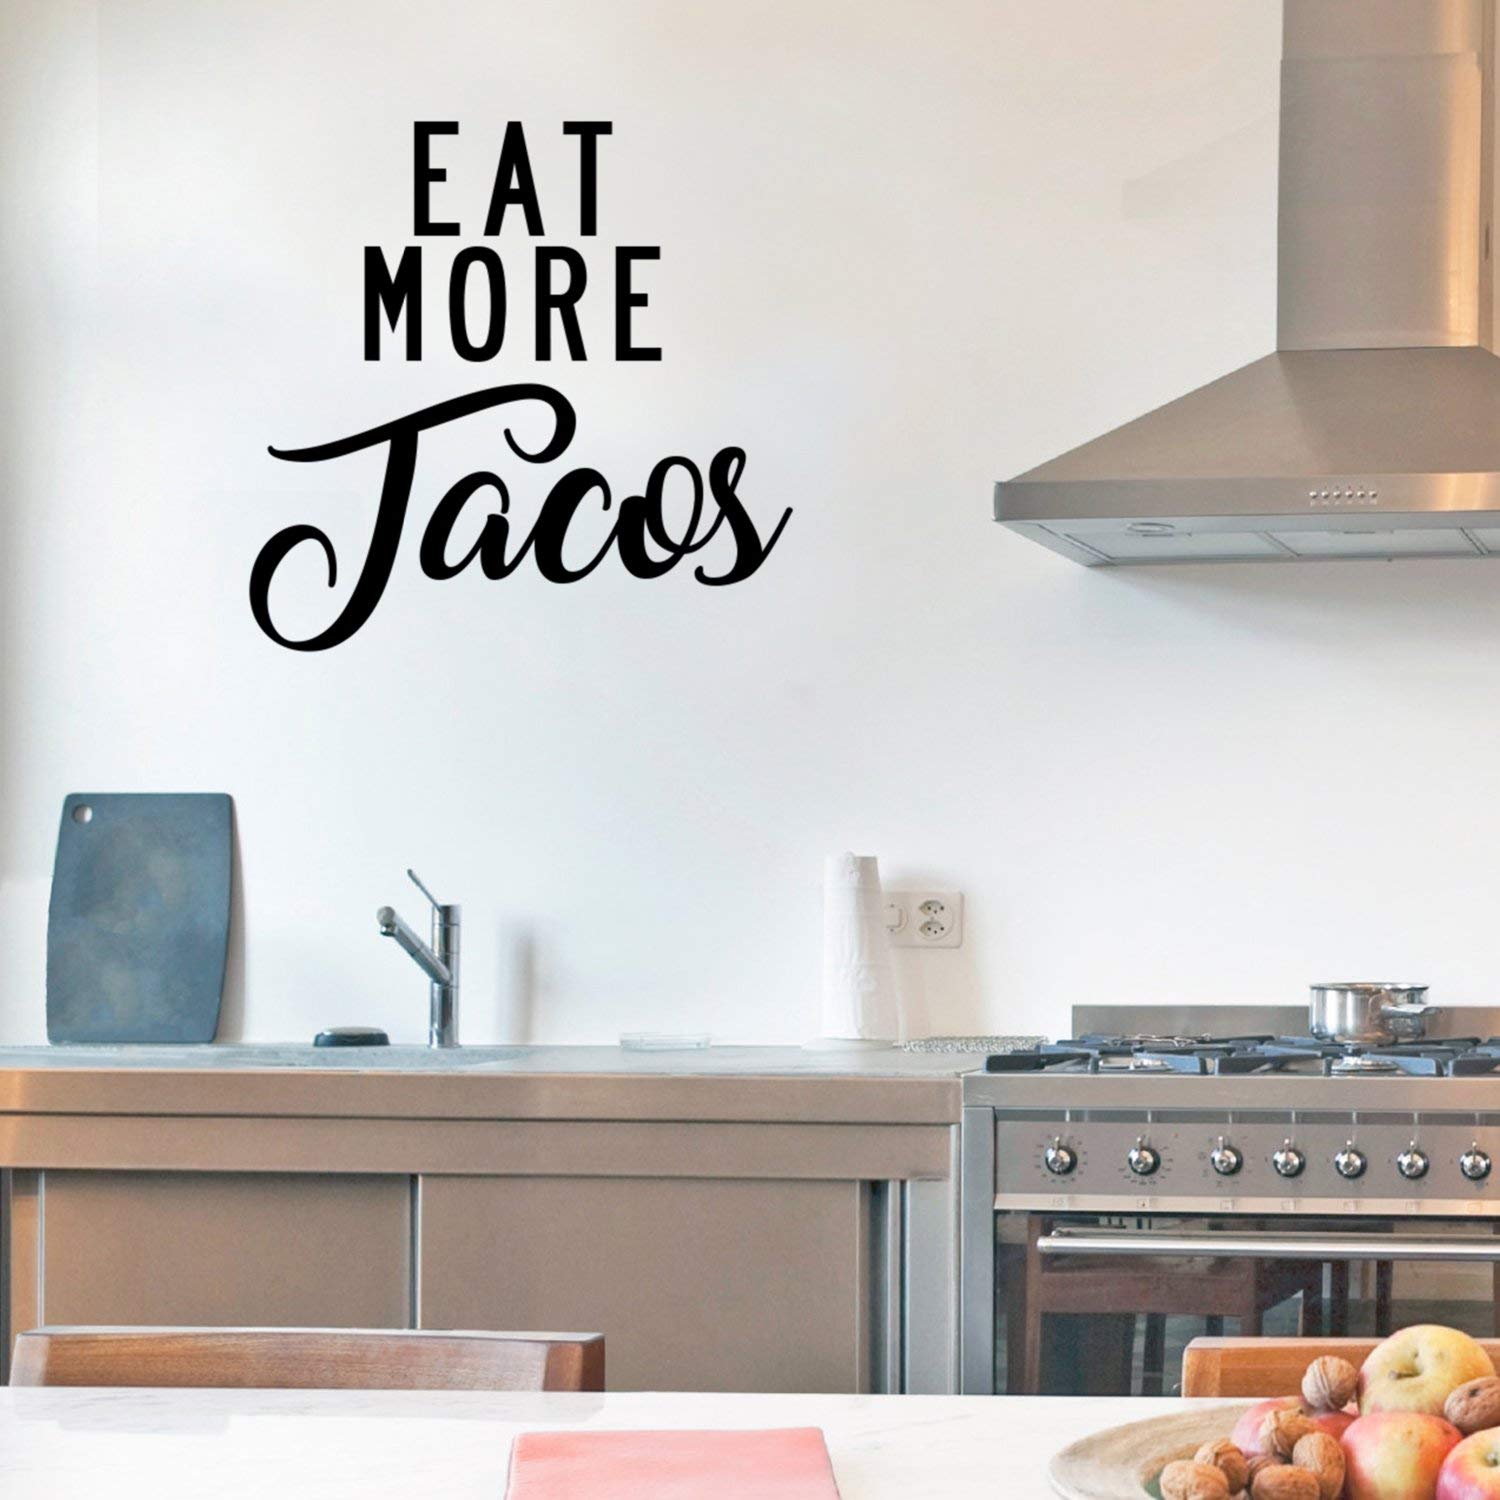 30 Kitchen Wall Decor to Impress Your Friends